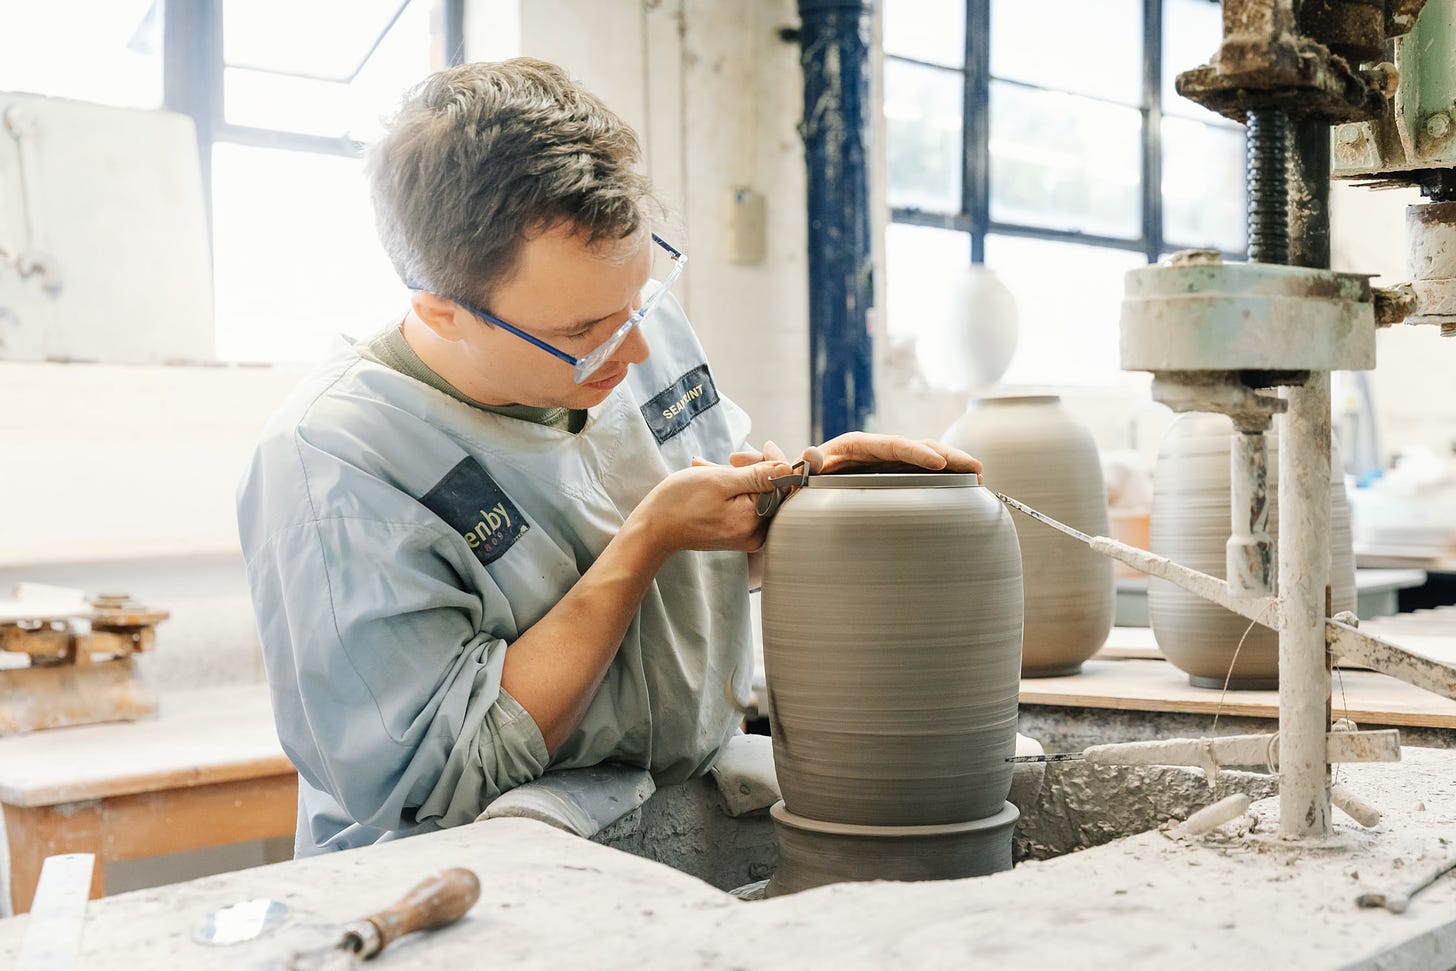 a young man is trimming a large clay vase in a factory or workshop setting. there is a huge window behind him and he is surrounded by other vases and machinery